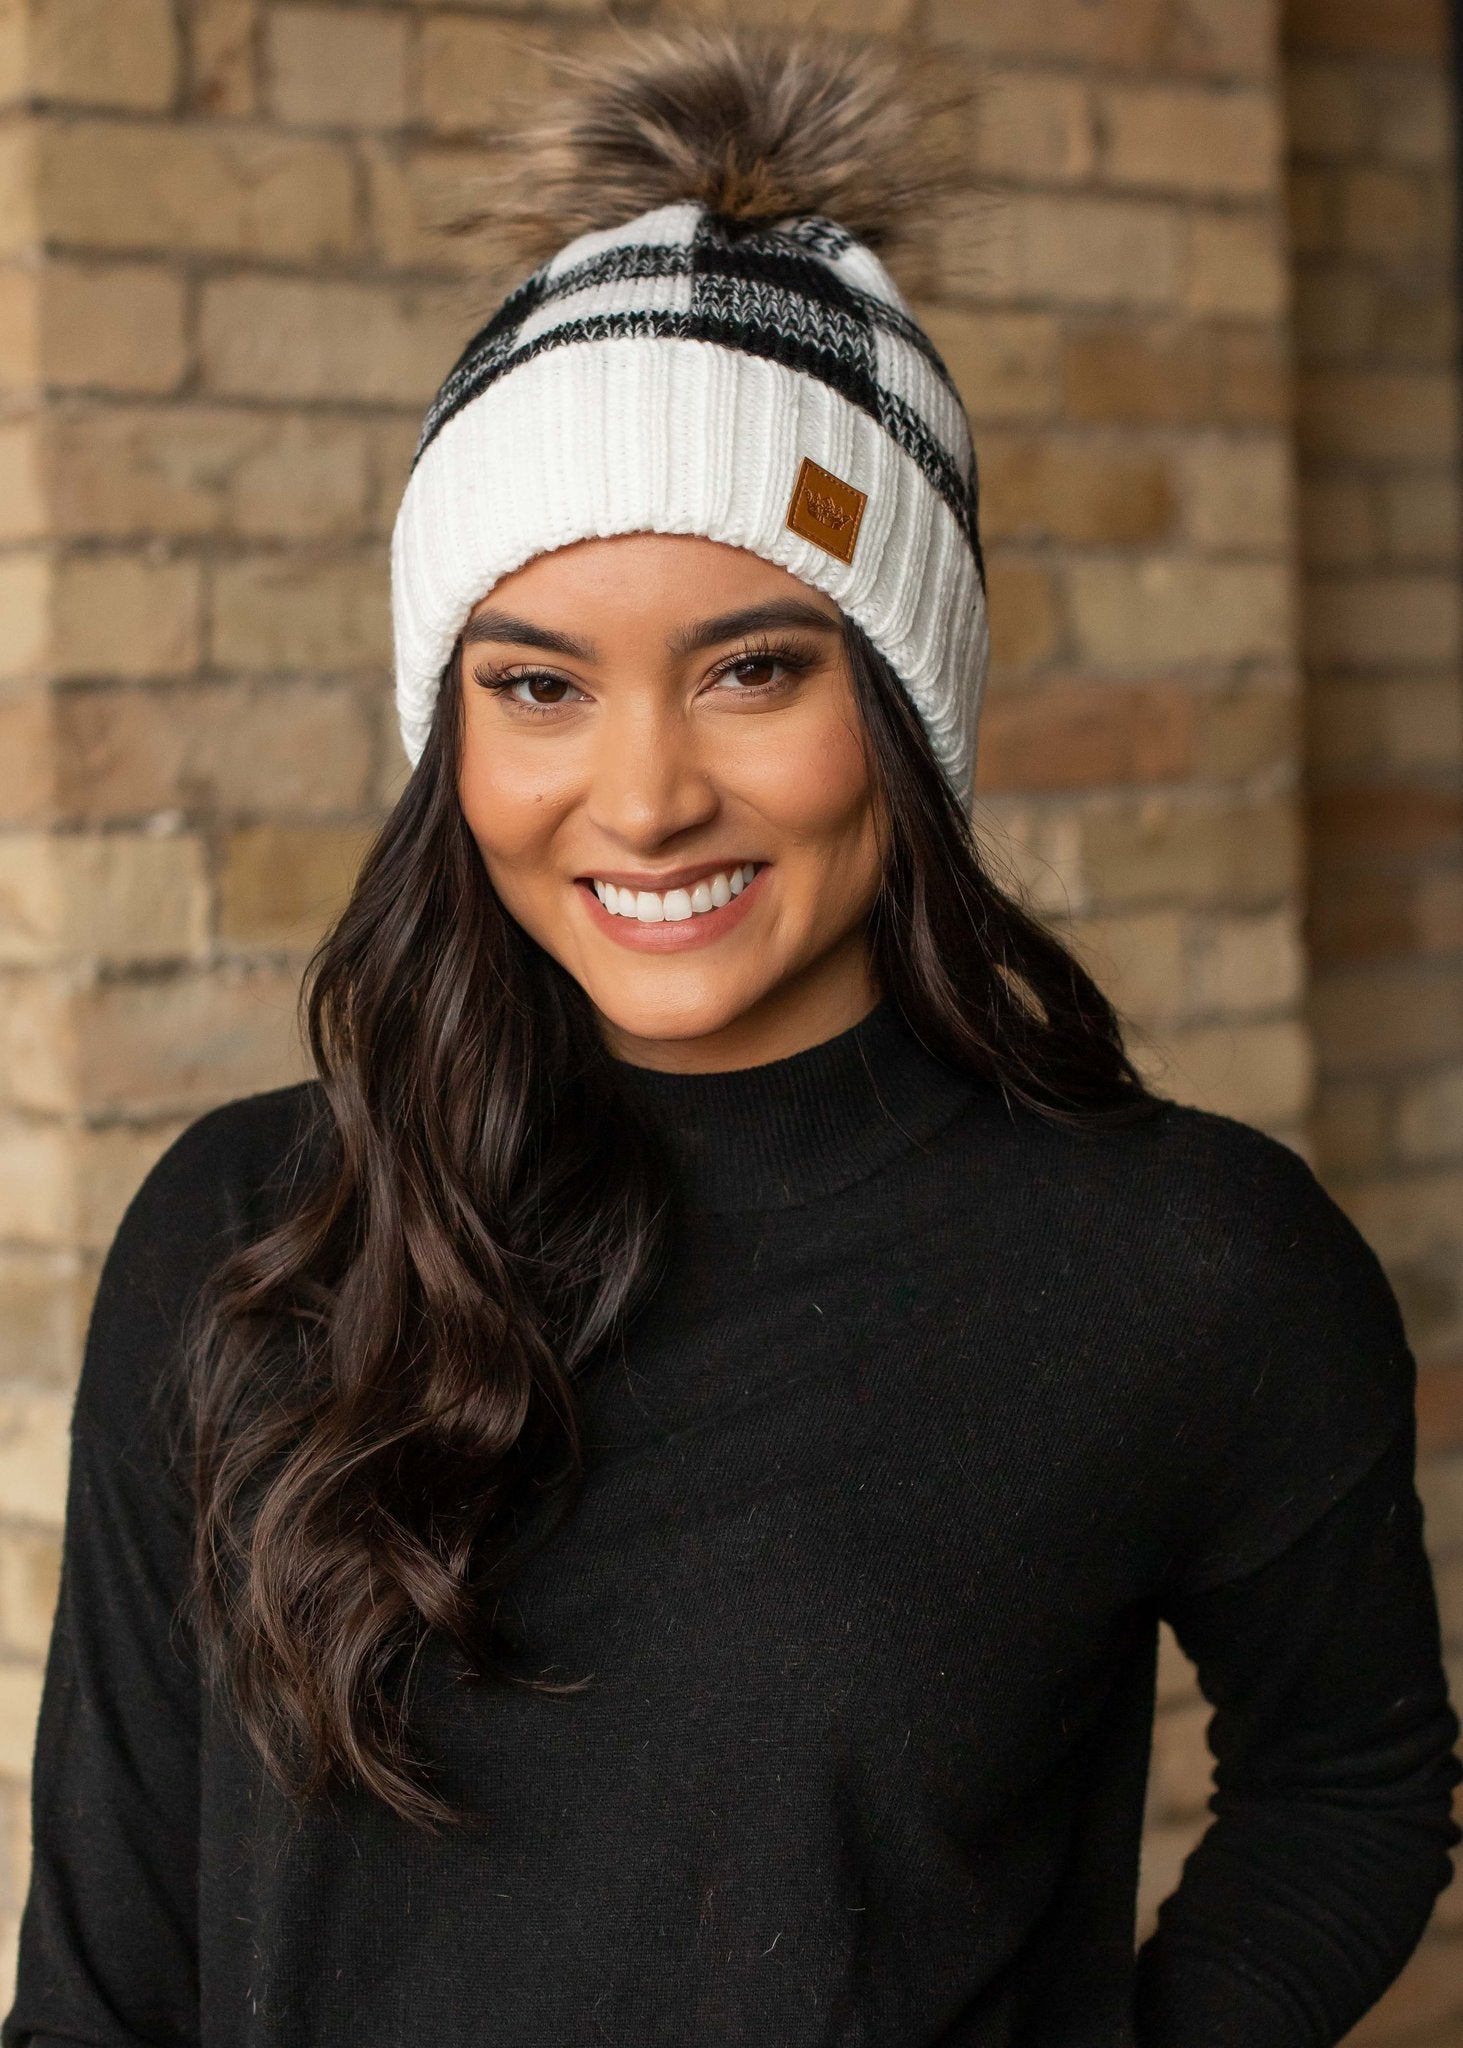 White and black buffalo plaid fleece lined knit hat with pom detail